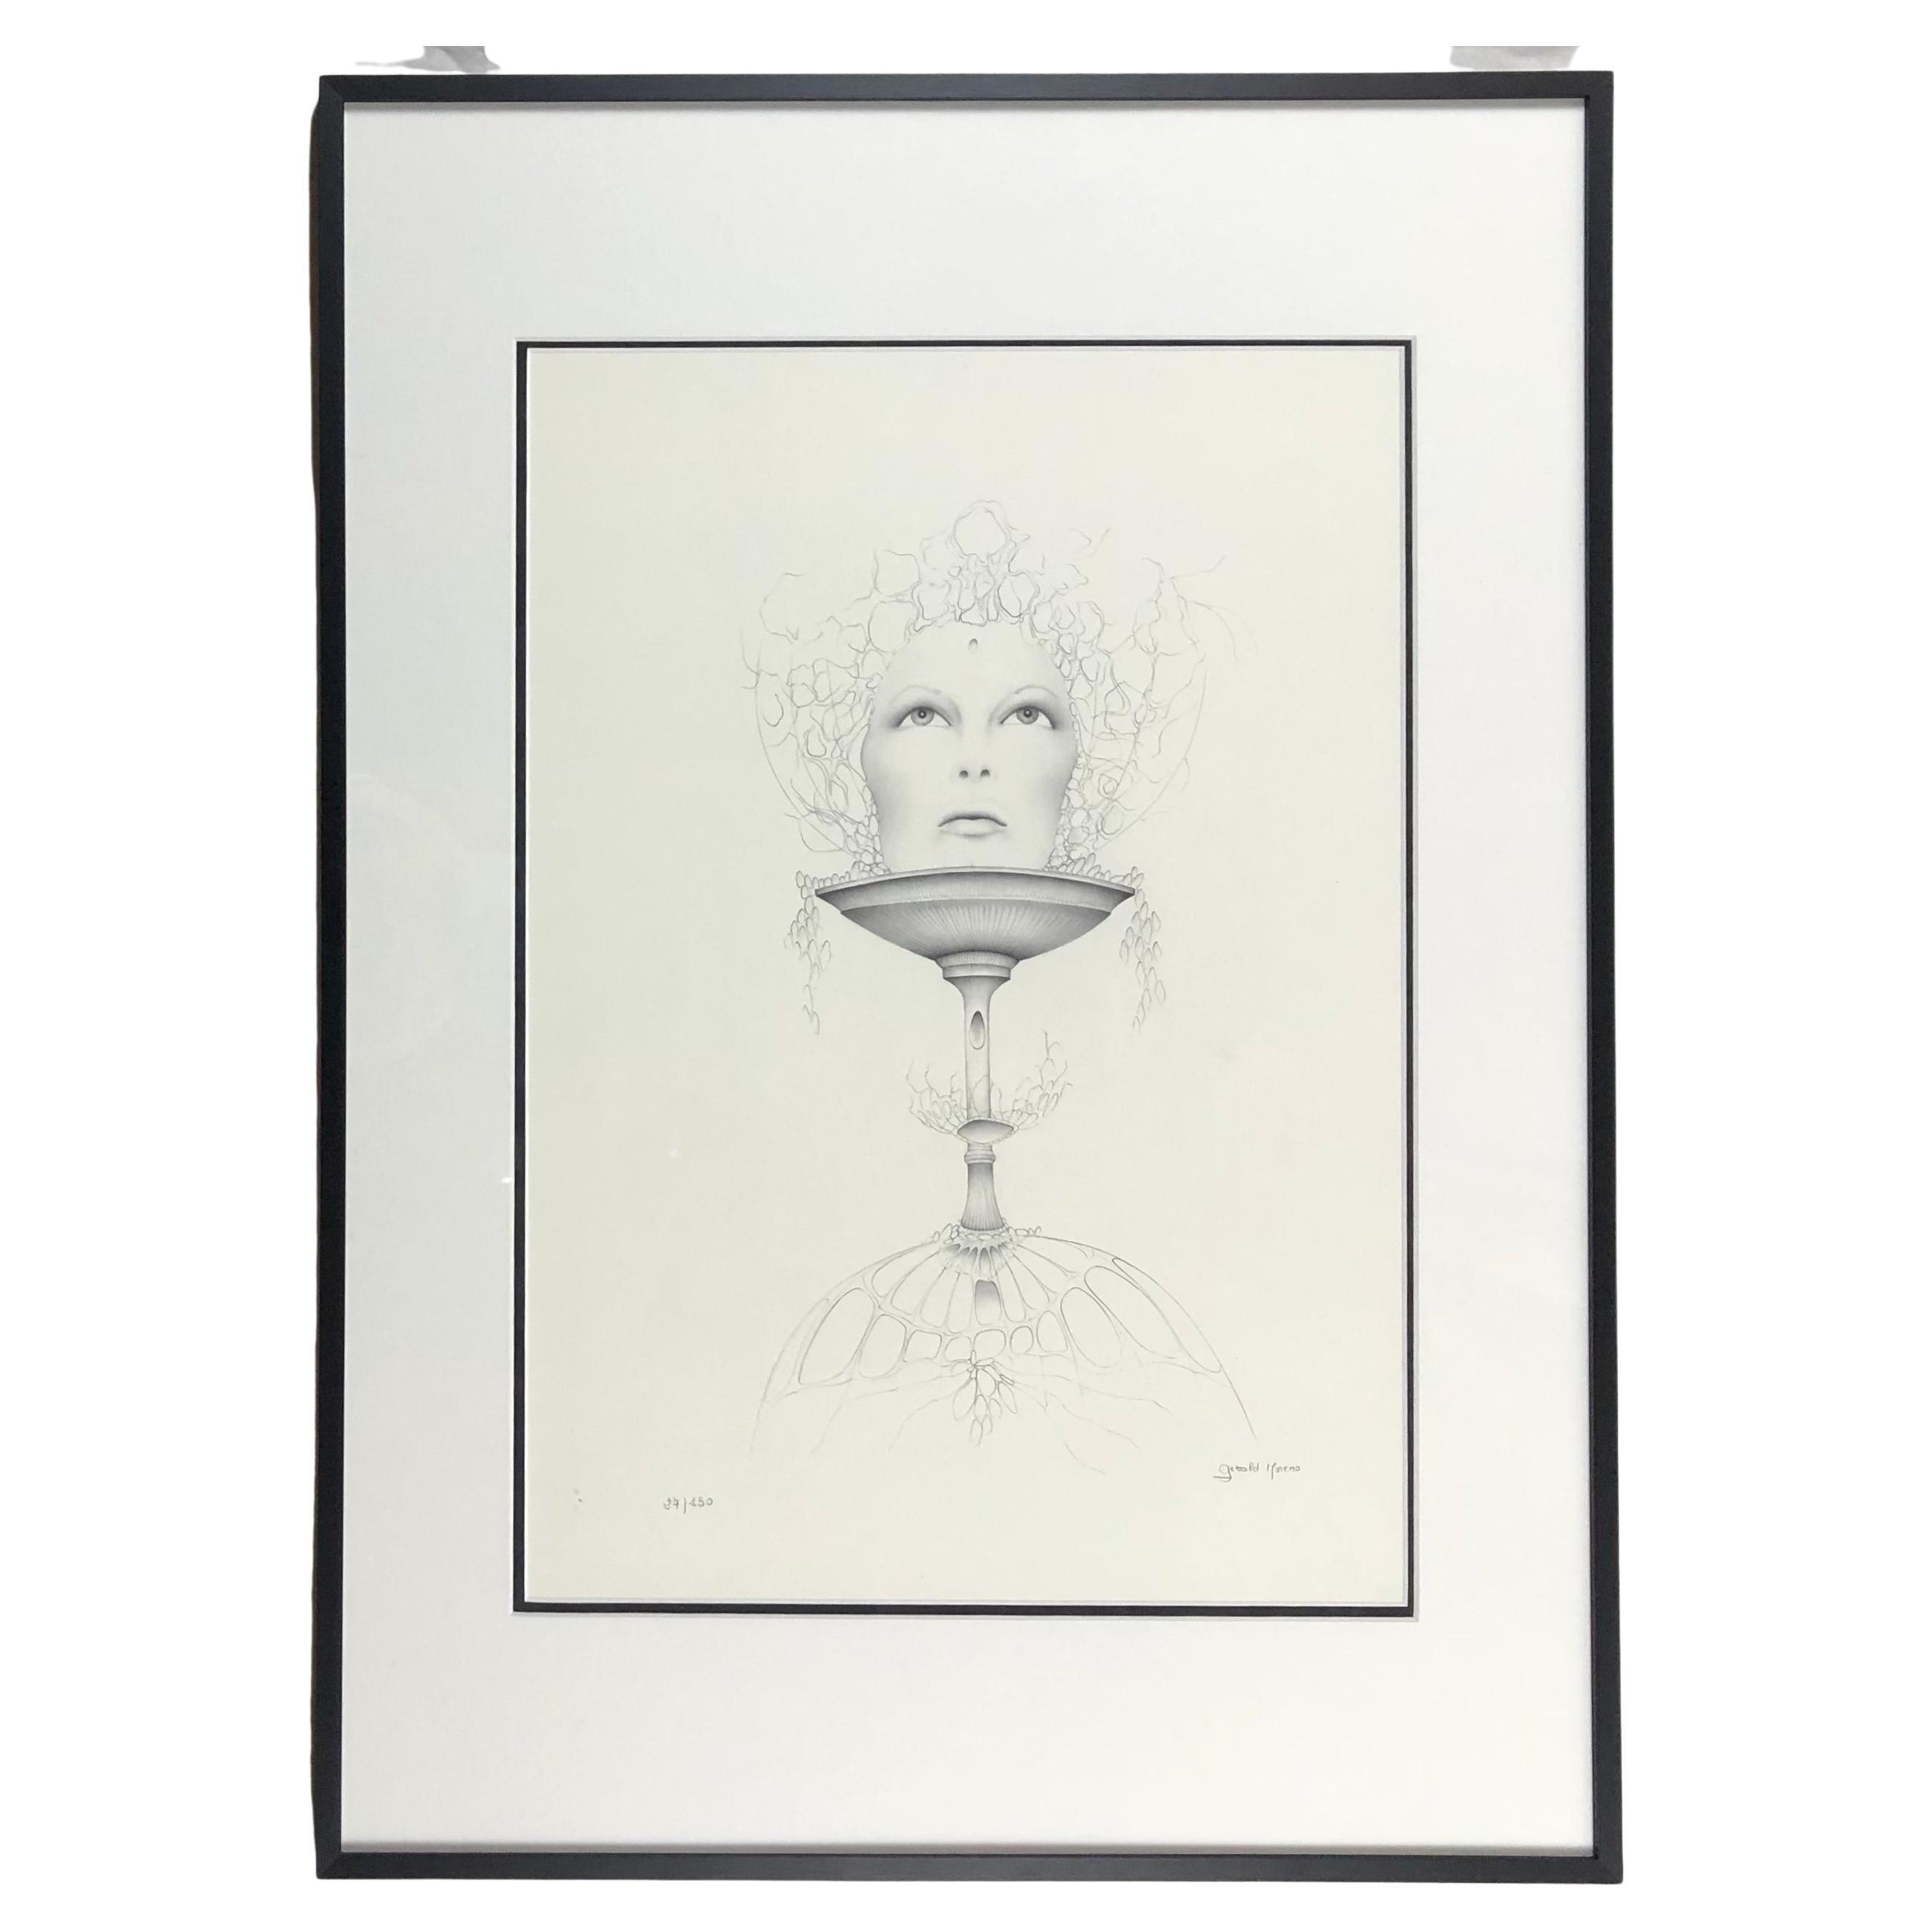 A stunning figurative surrealist work of contemporary art signed by the very talented French artist, Gerald Moreno. 
Moreno's work is often described as 